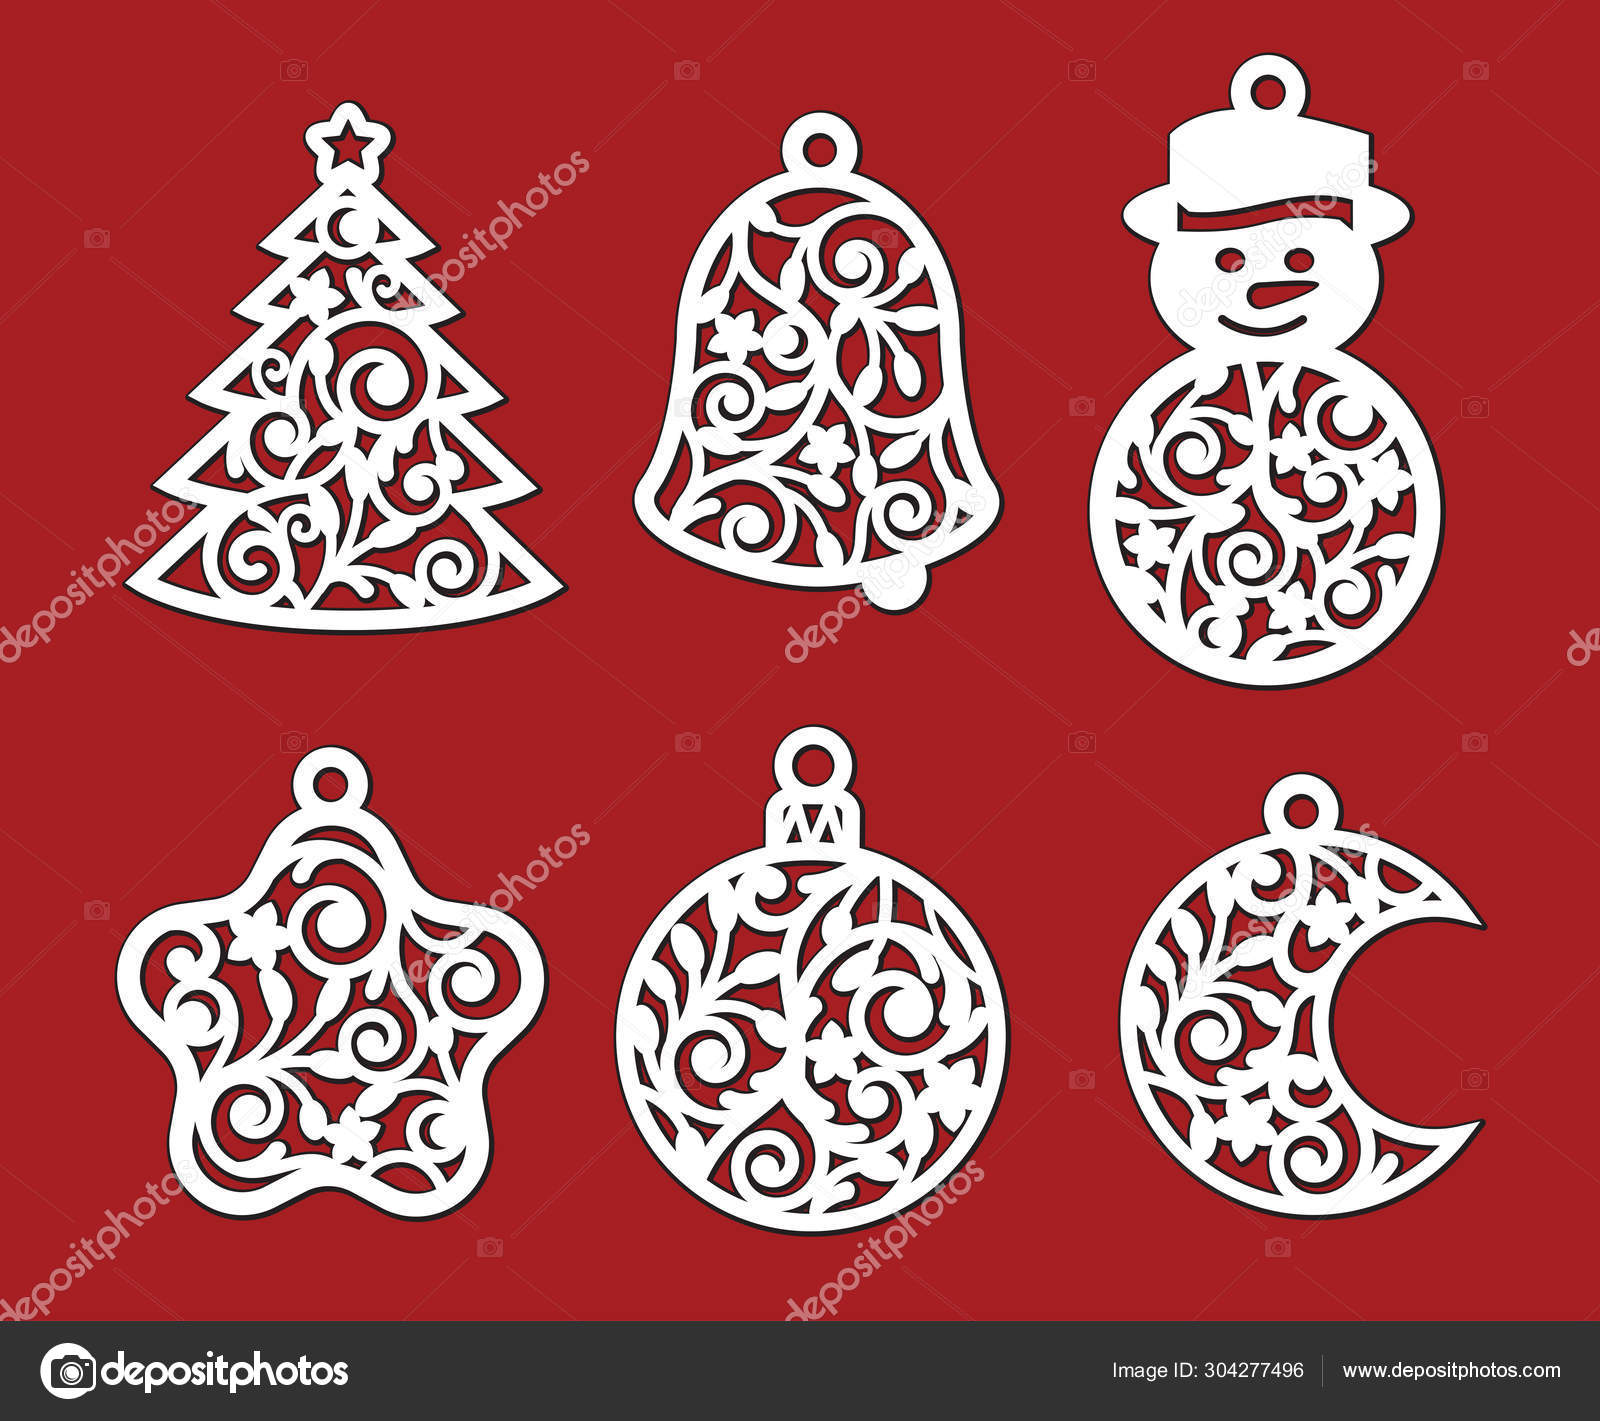 Aunt Jolitee Laser Cut Wood Ornament with Christmas Icon Cutouts